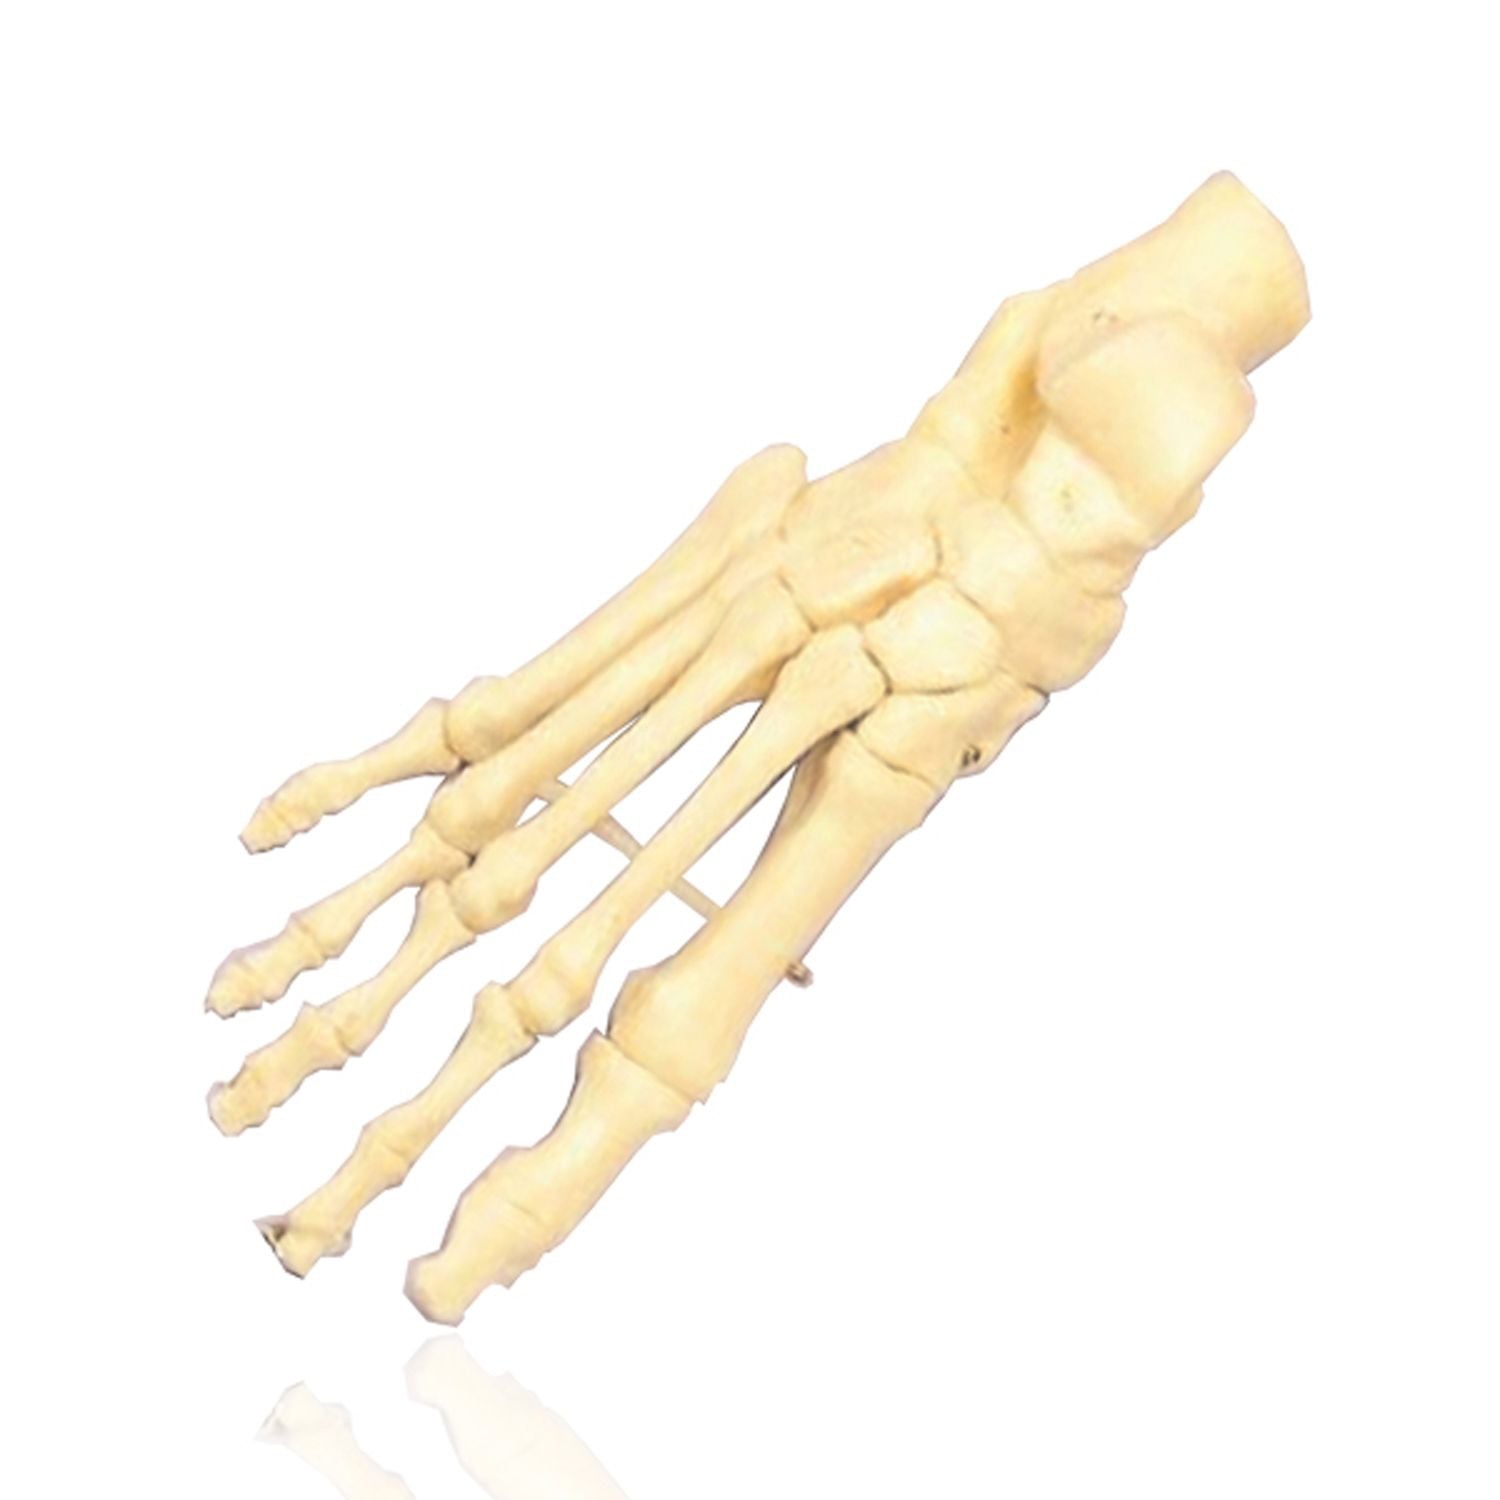 Foot Model - Articulated